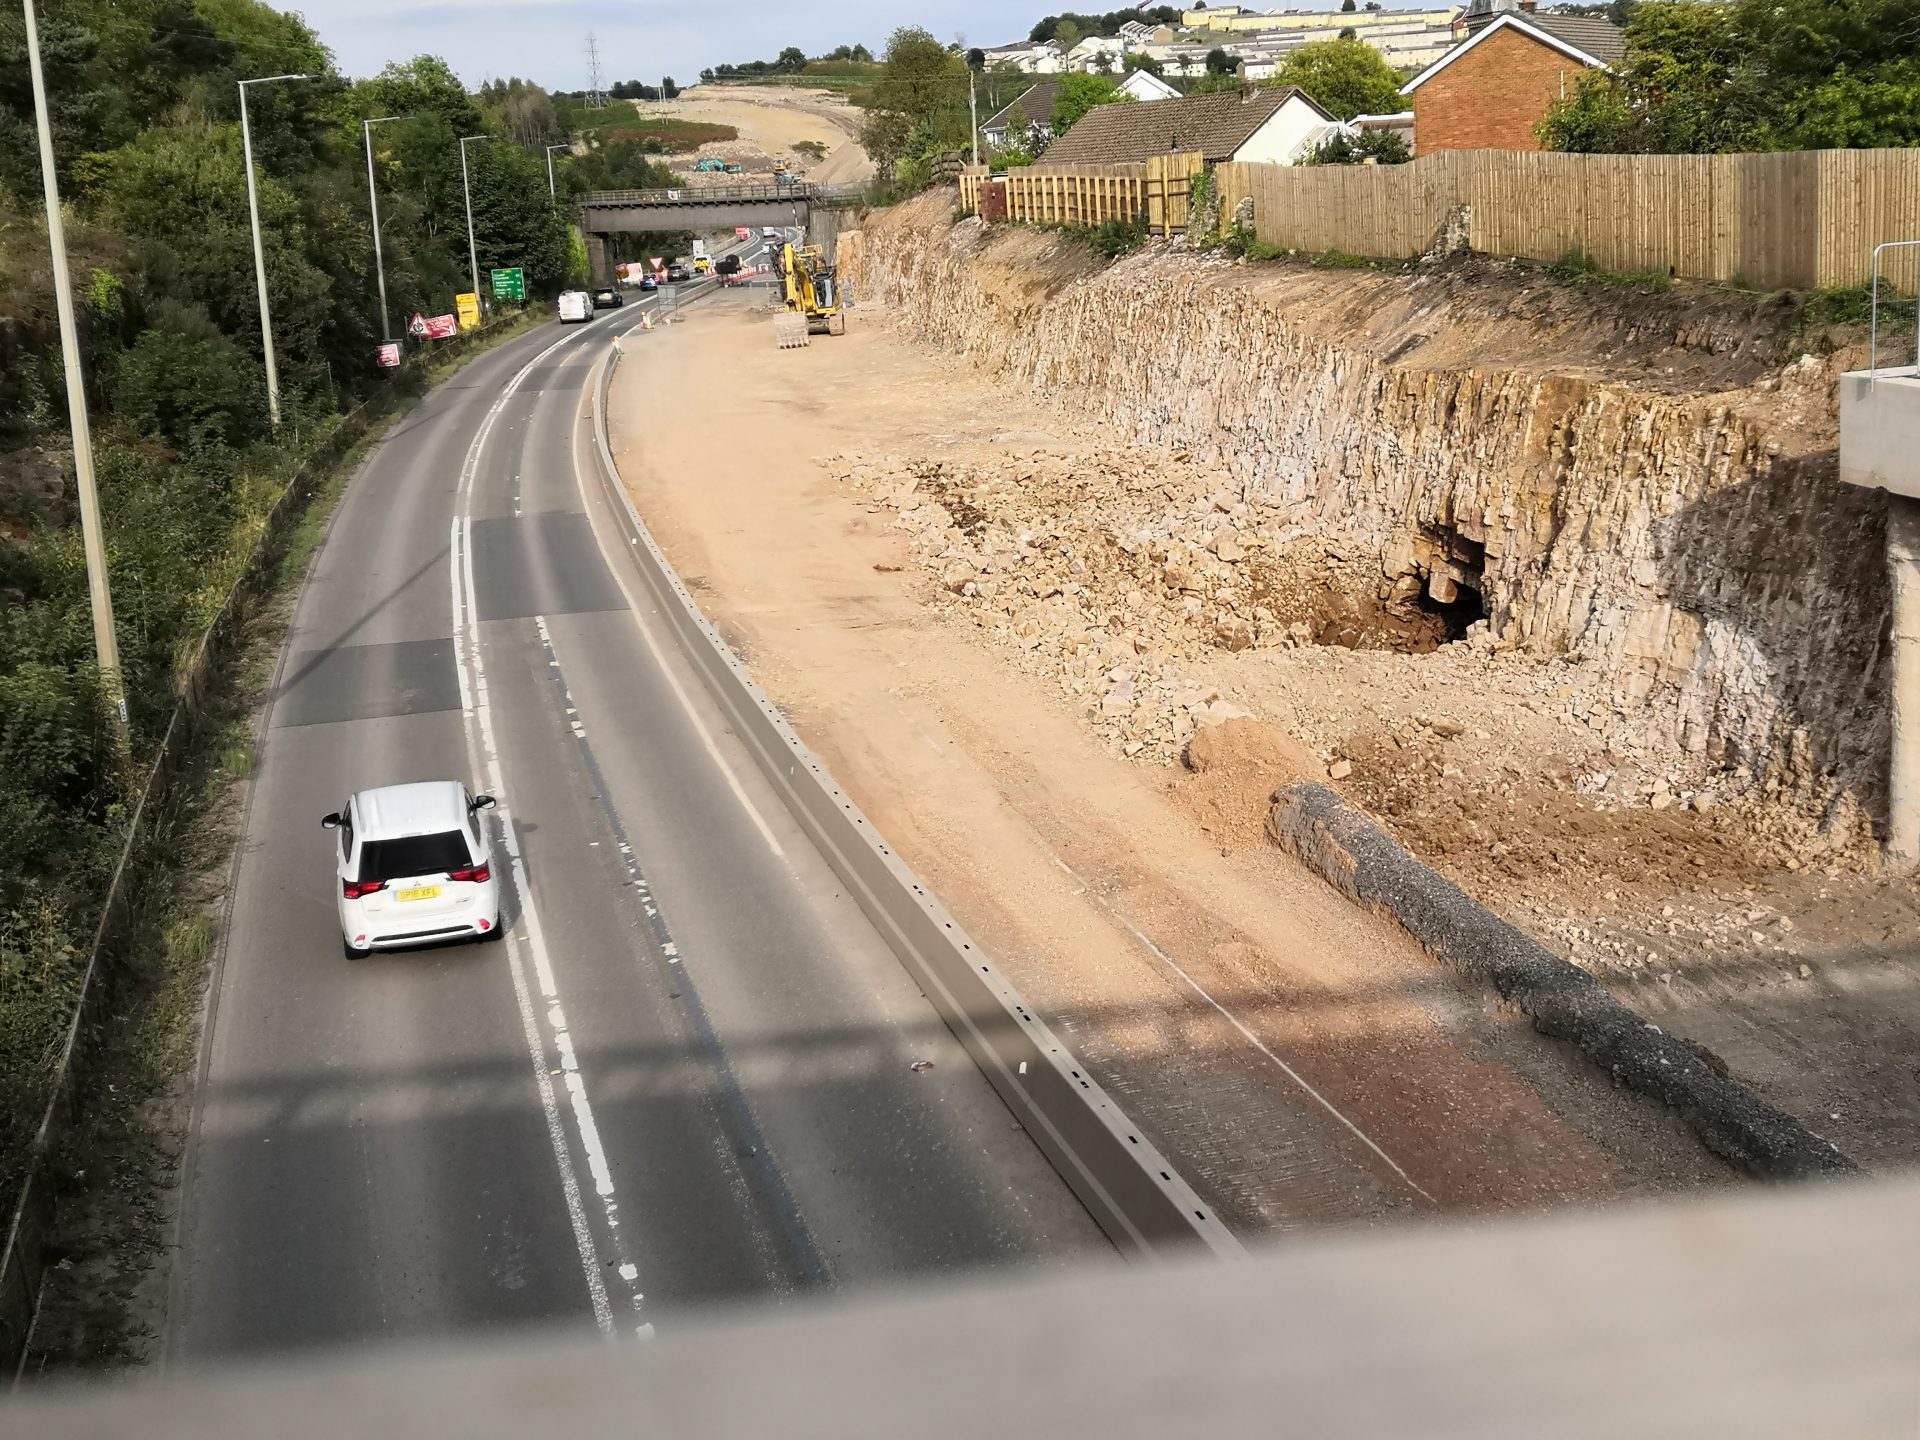 New Cave entrance on the Heads of the Valleys Road